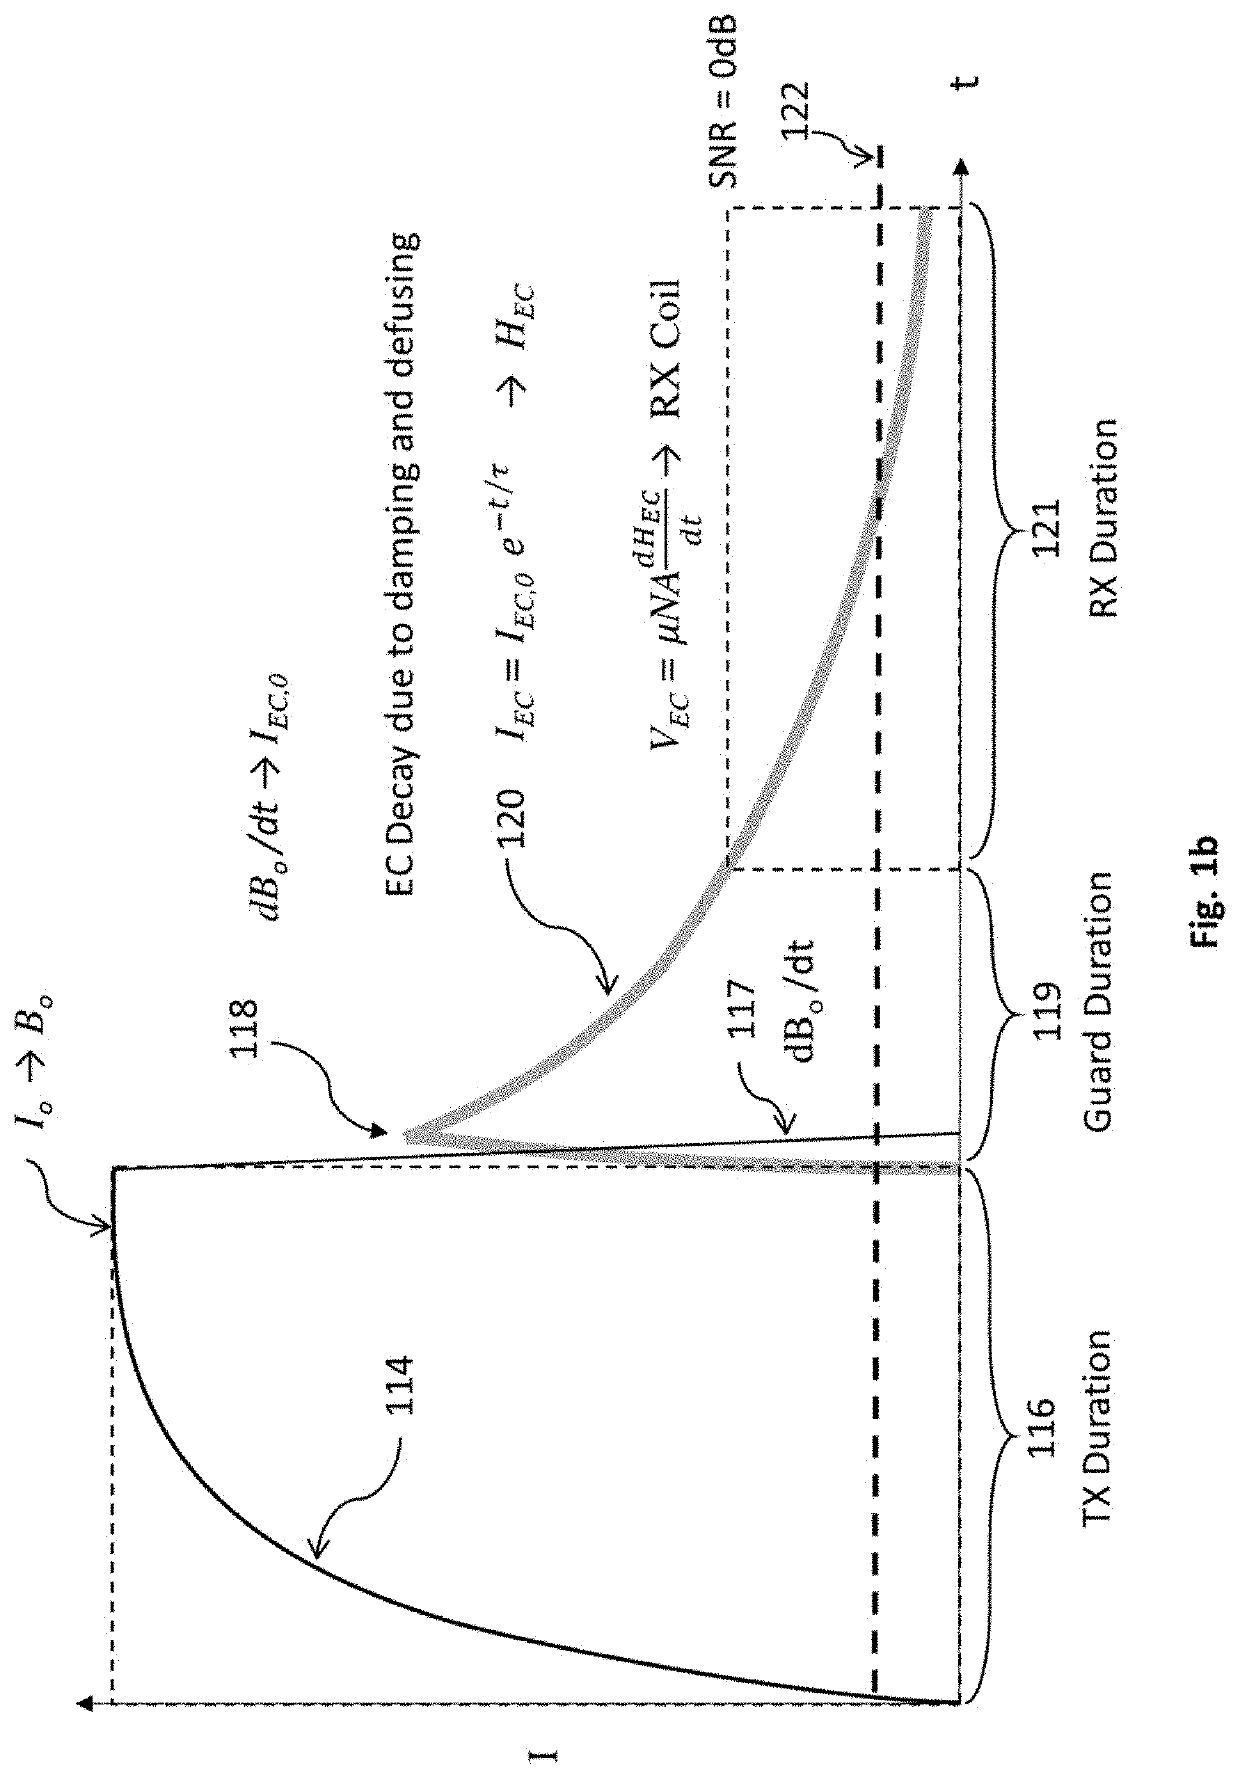 Hybrid magnetic core for inductive transducer